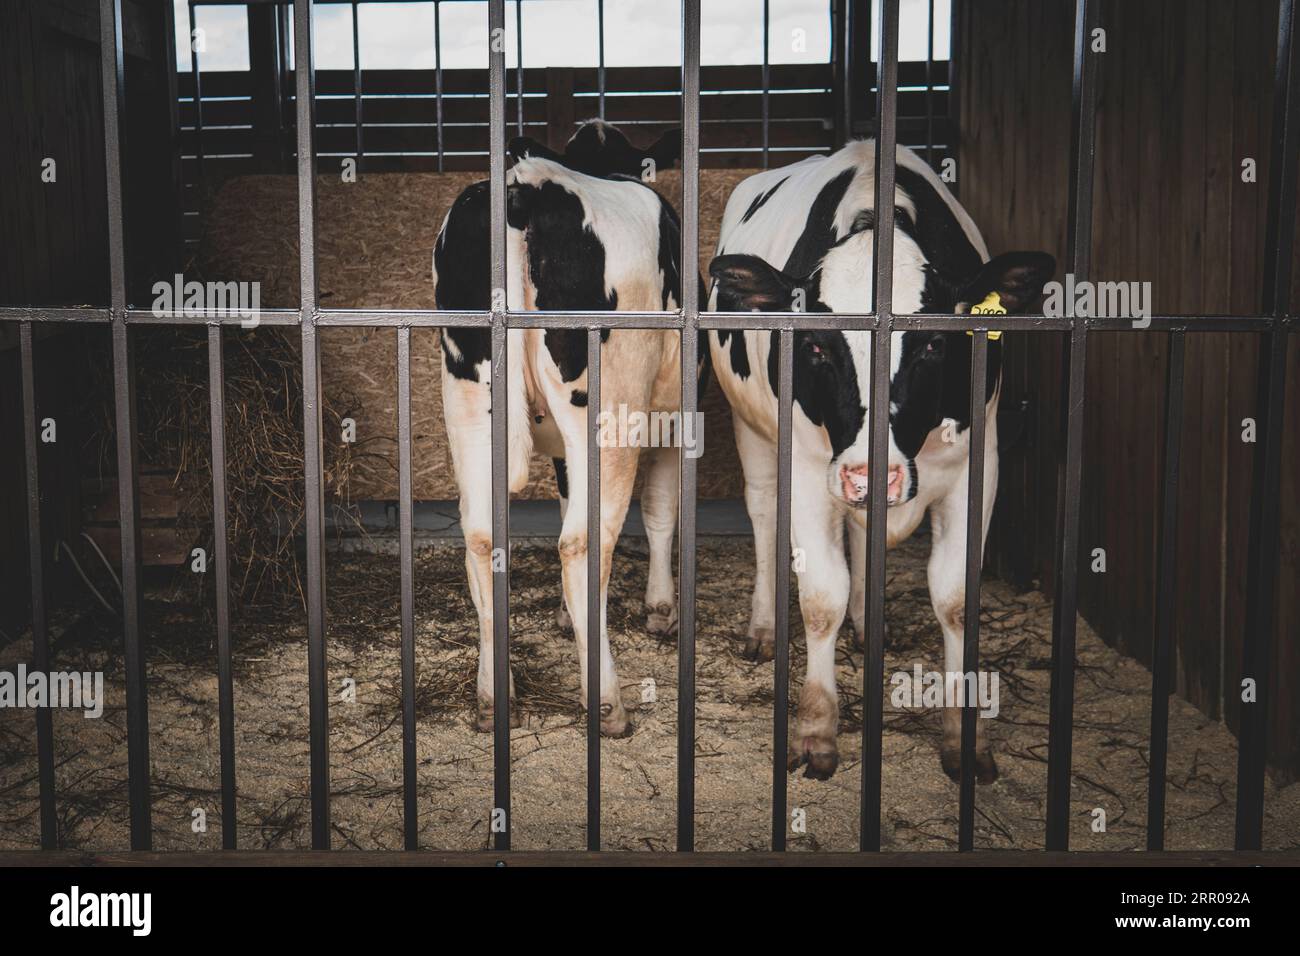 A cow and her calf are standing in a cage. Cattle breeding. focus on the cell Stock Photo